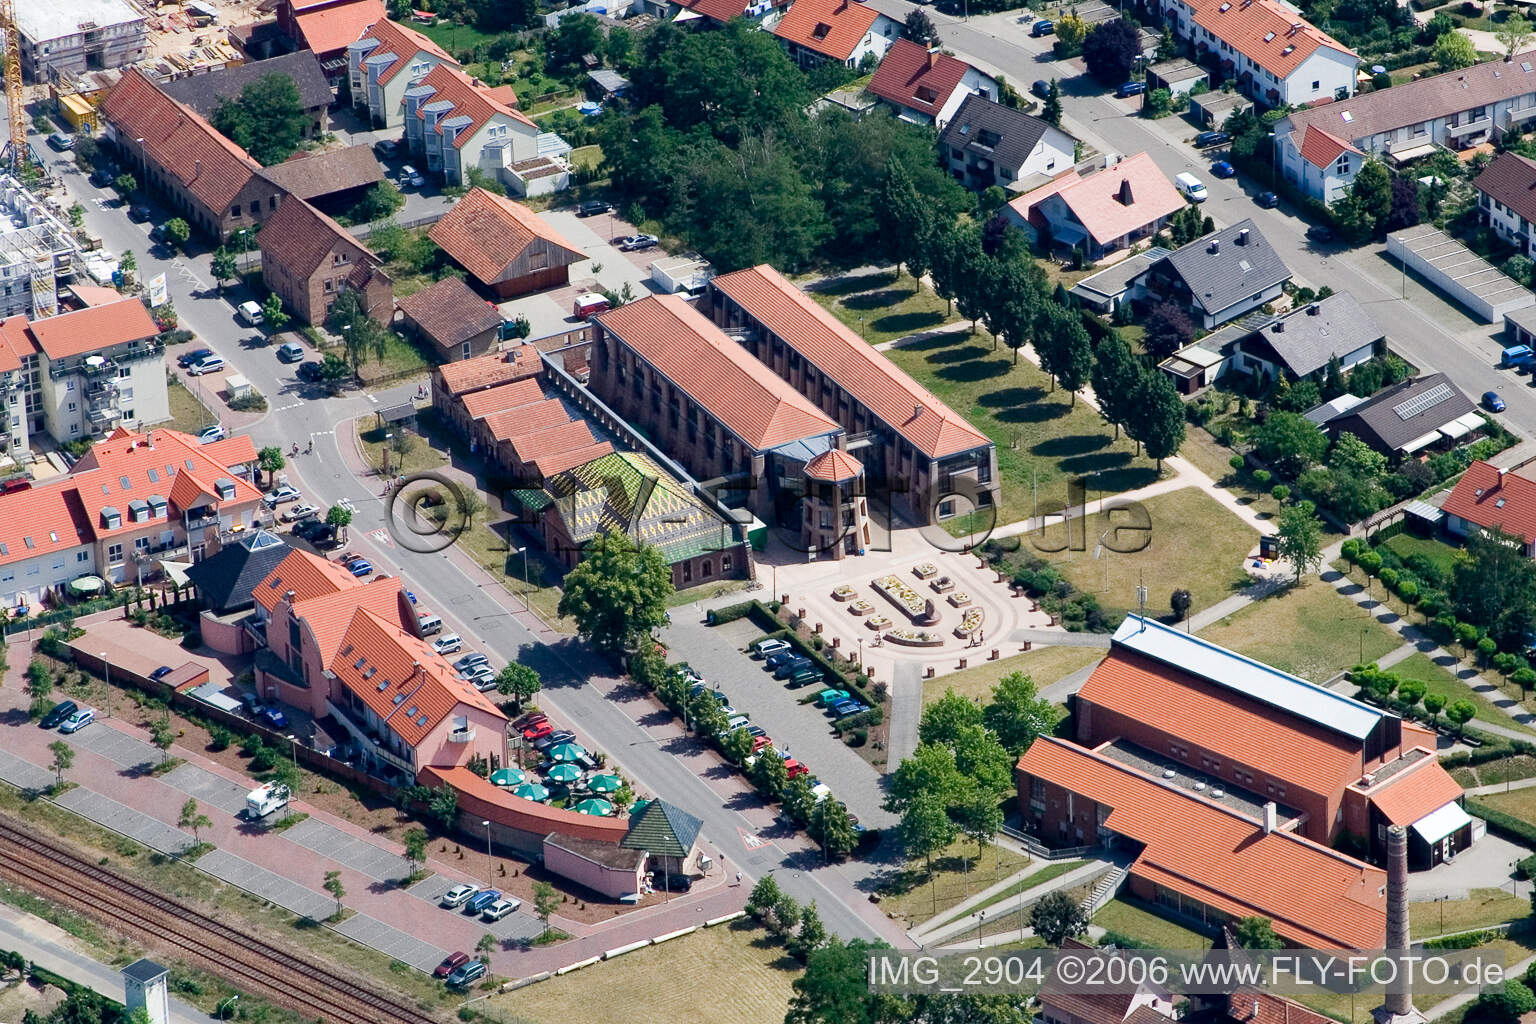 Aerial photograpy of Brickworks Museum in Jockgrim in the state Rhineland-Palatinate, Germany